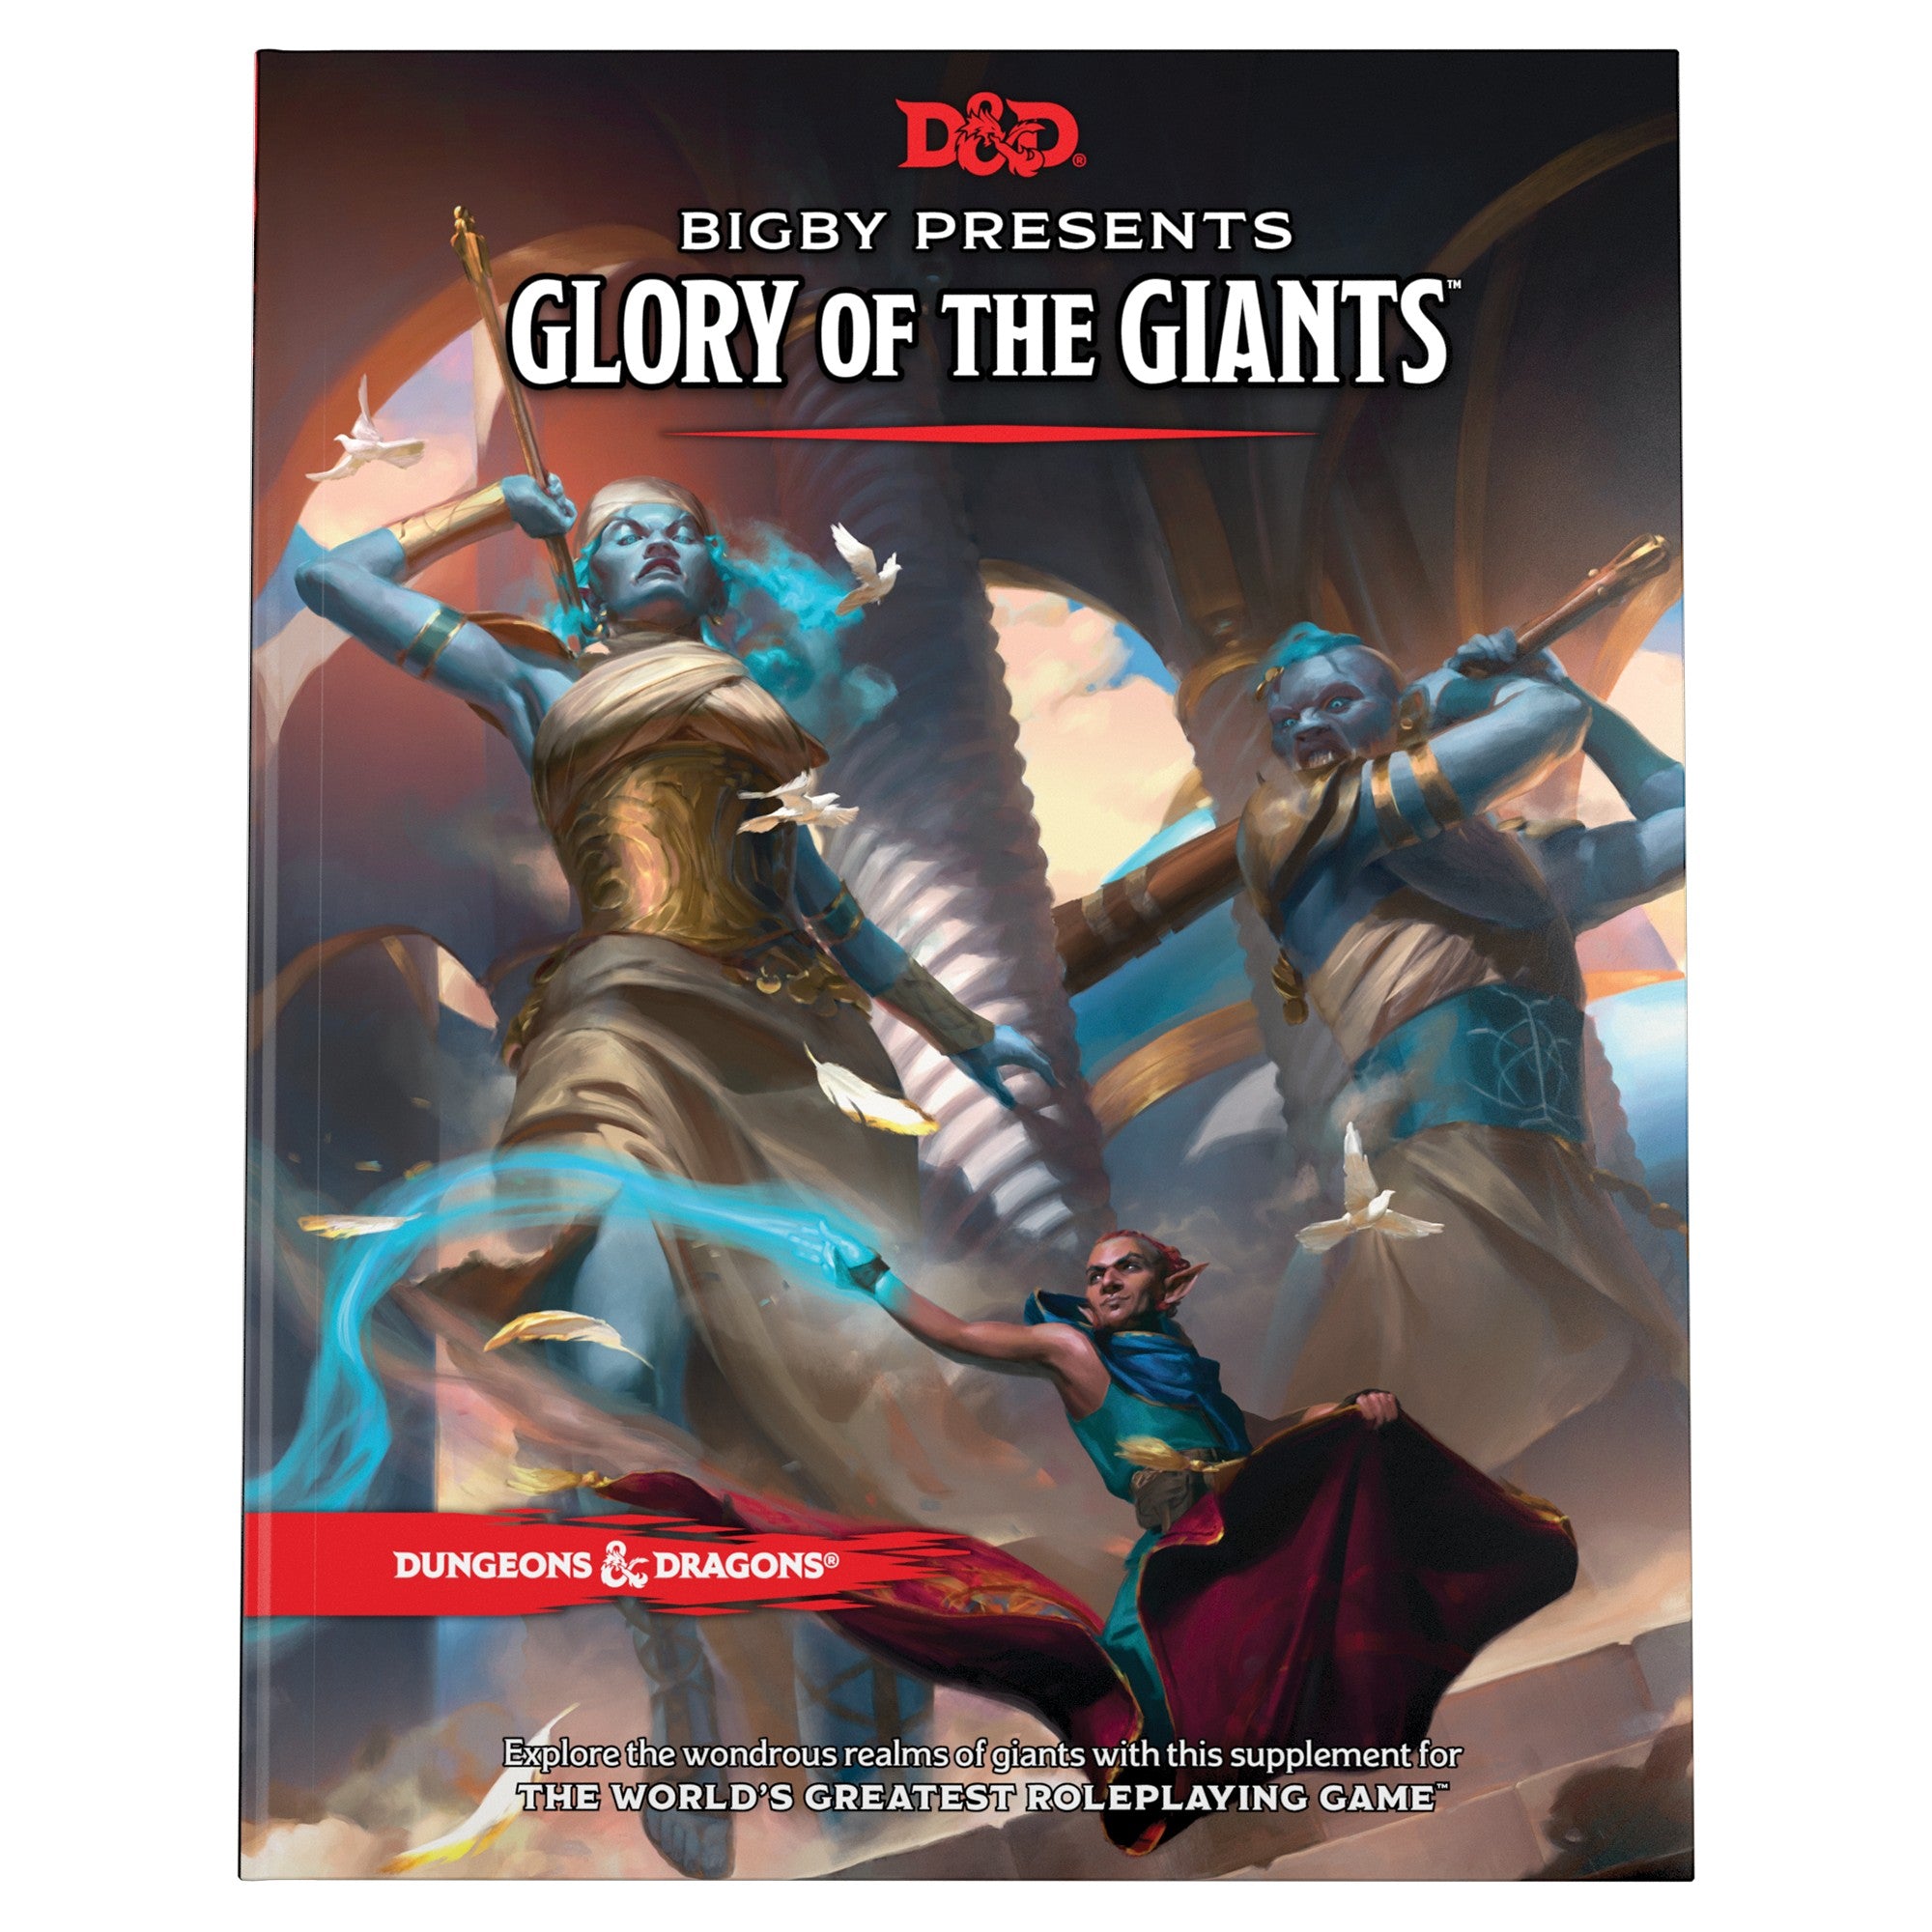 Dungeons & Dragons - Bigby Presents: Glory of the Giants - Bards & Cards